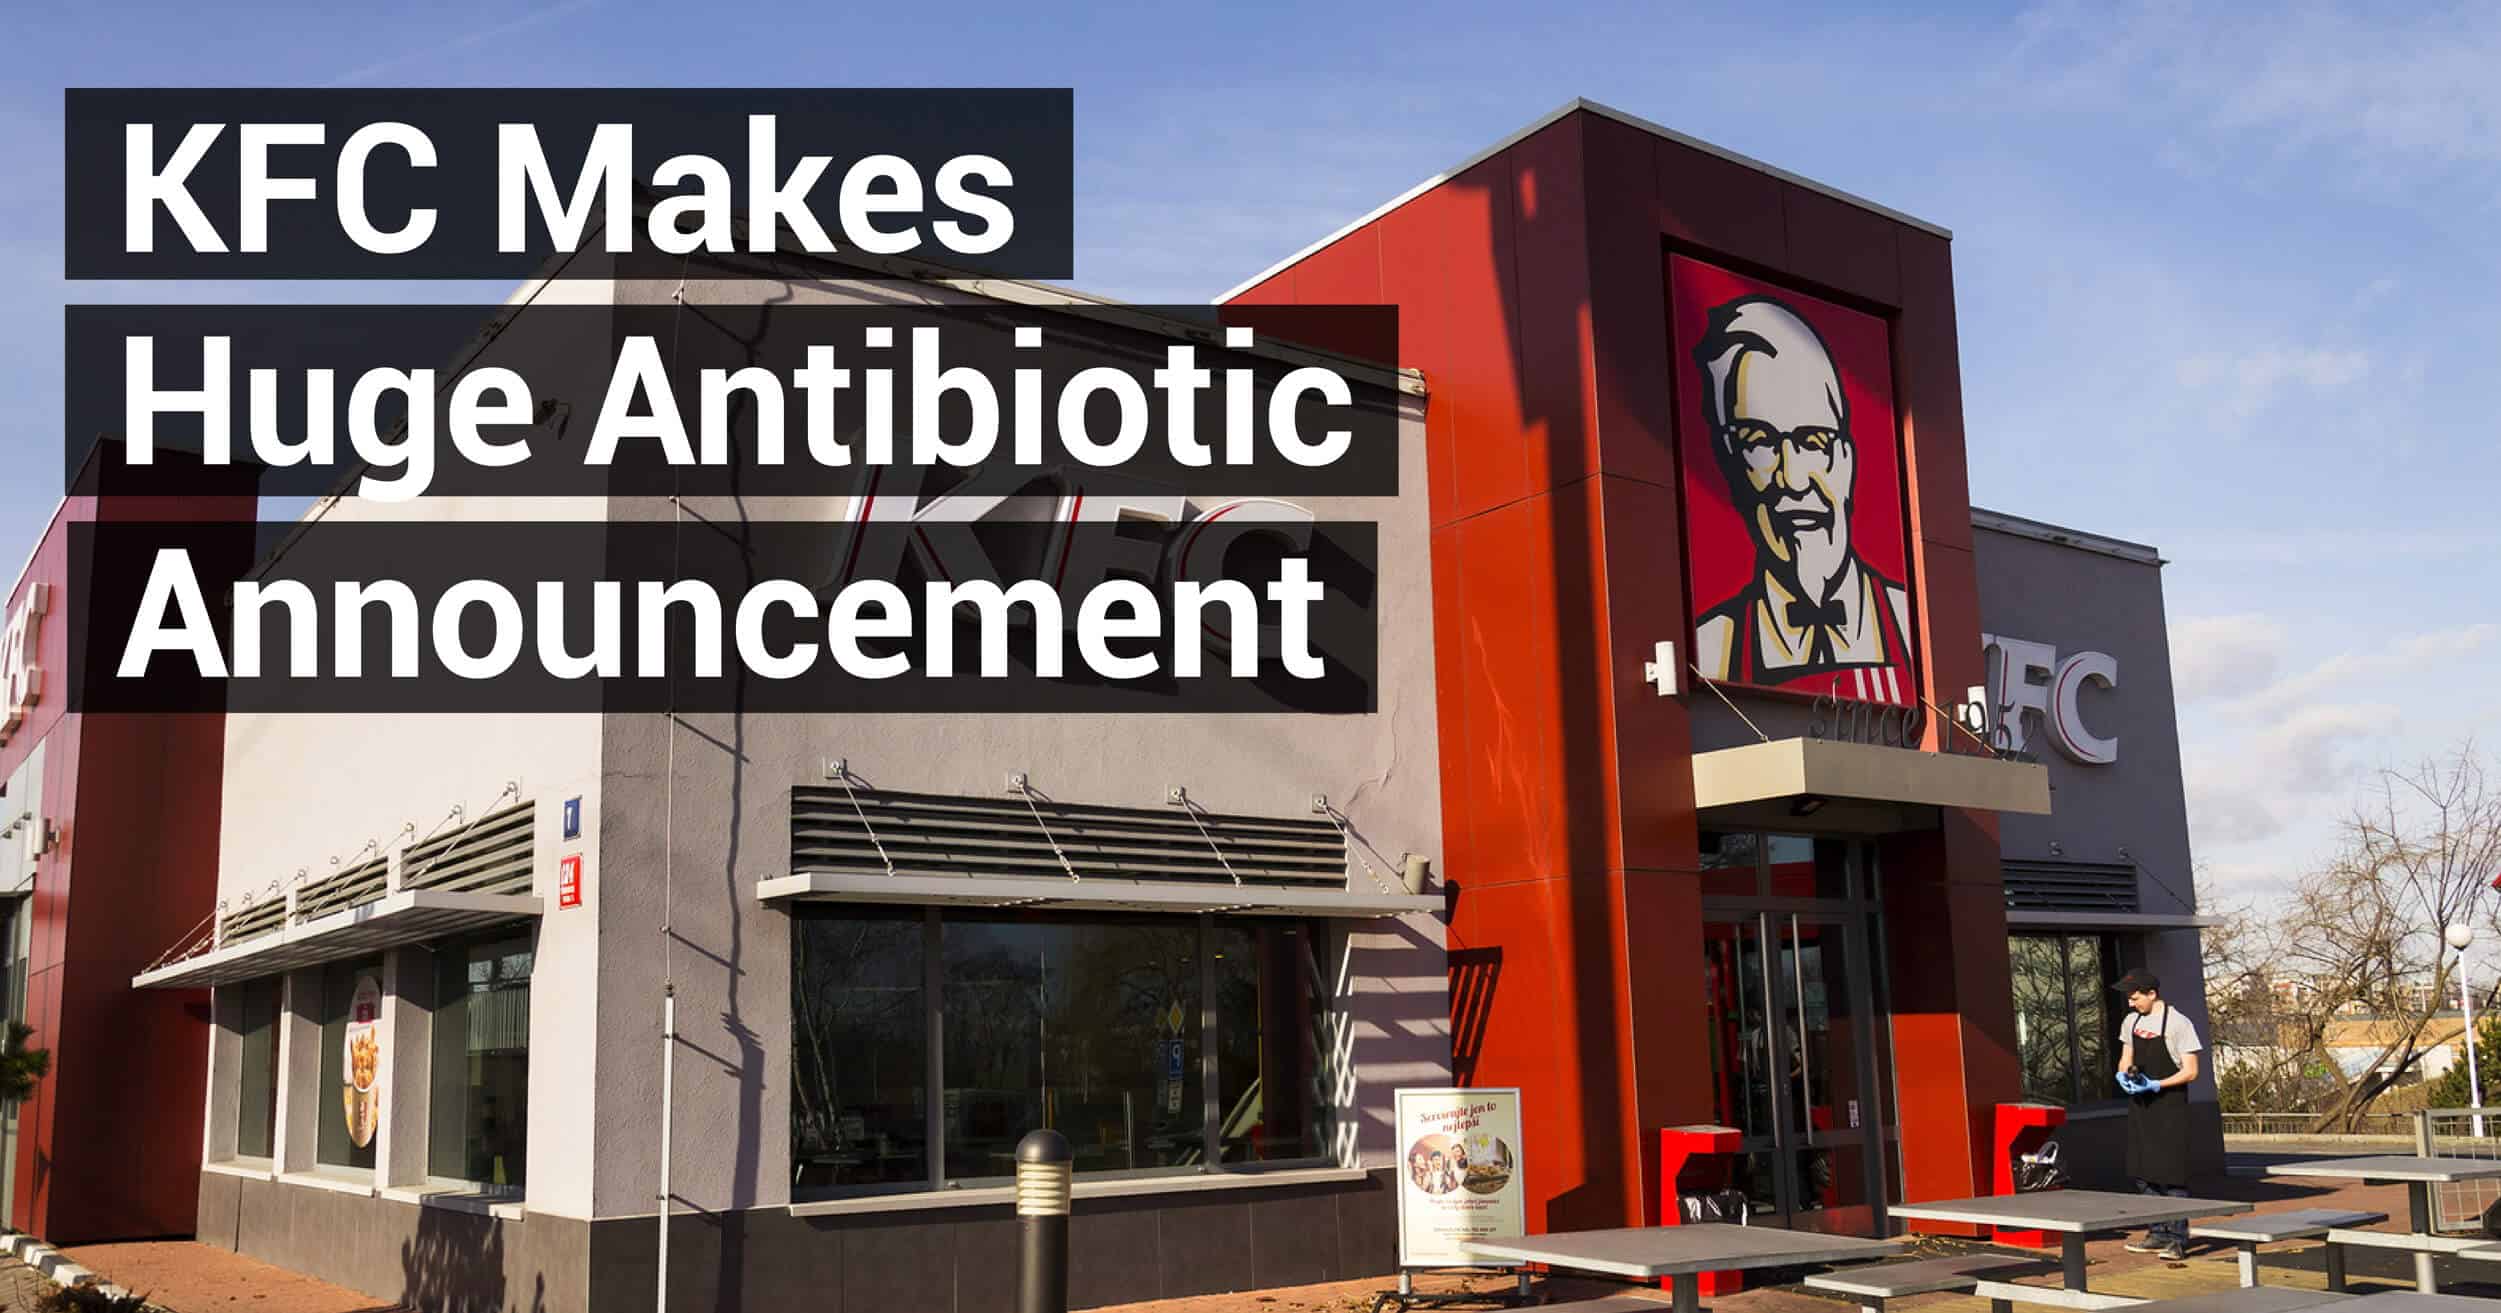 Kfc Will Stop Using Human Antibiotics In Chicken By End Of 2018 Company Says Dr Axe 